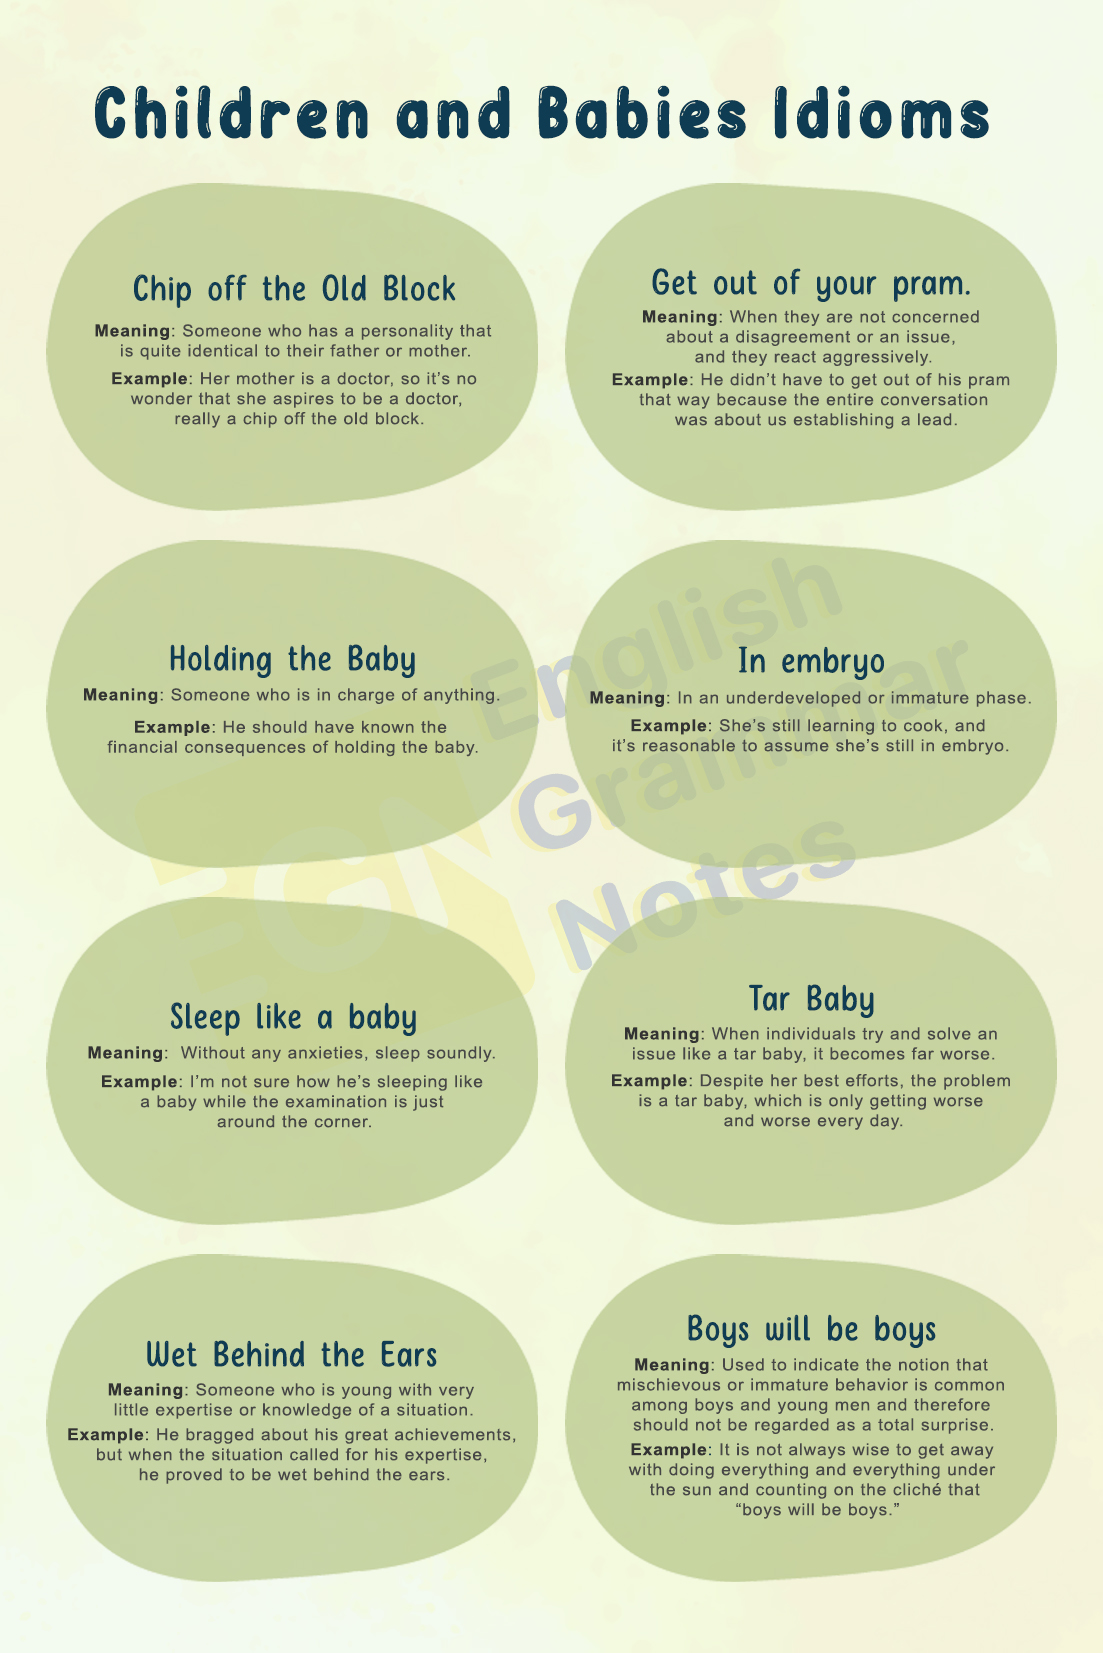 Idioms on Children and Babies